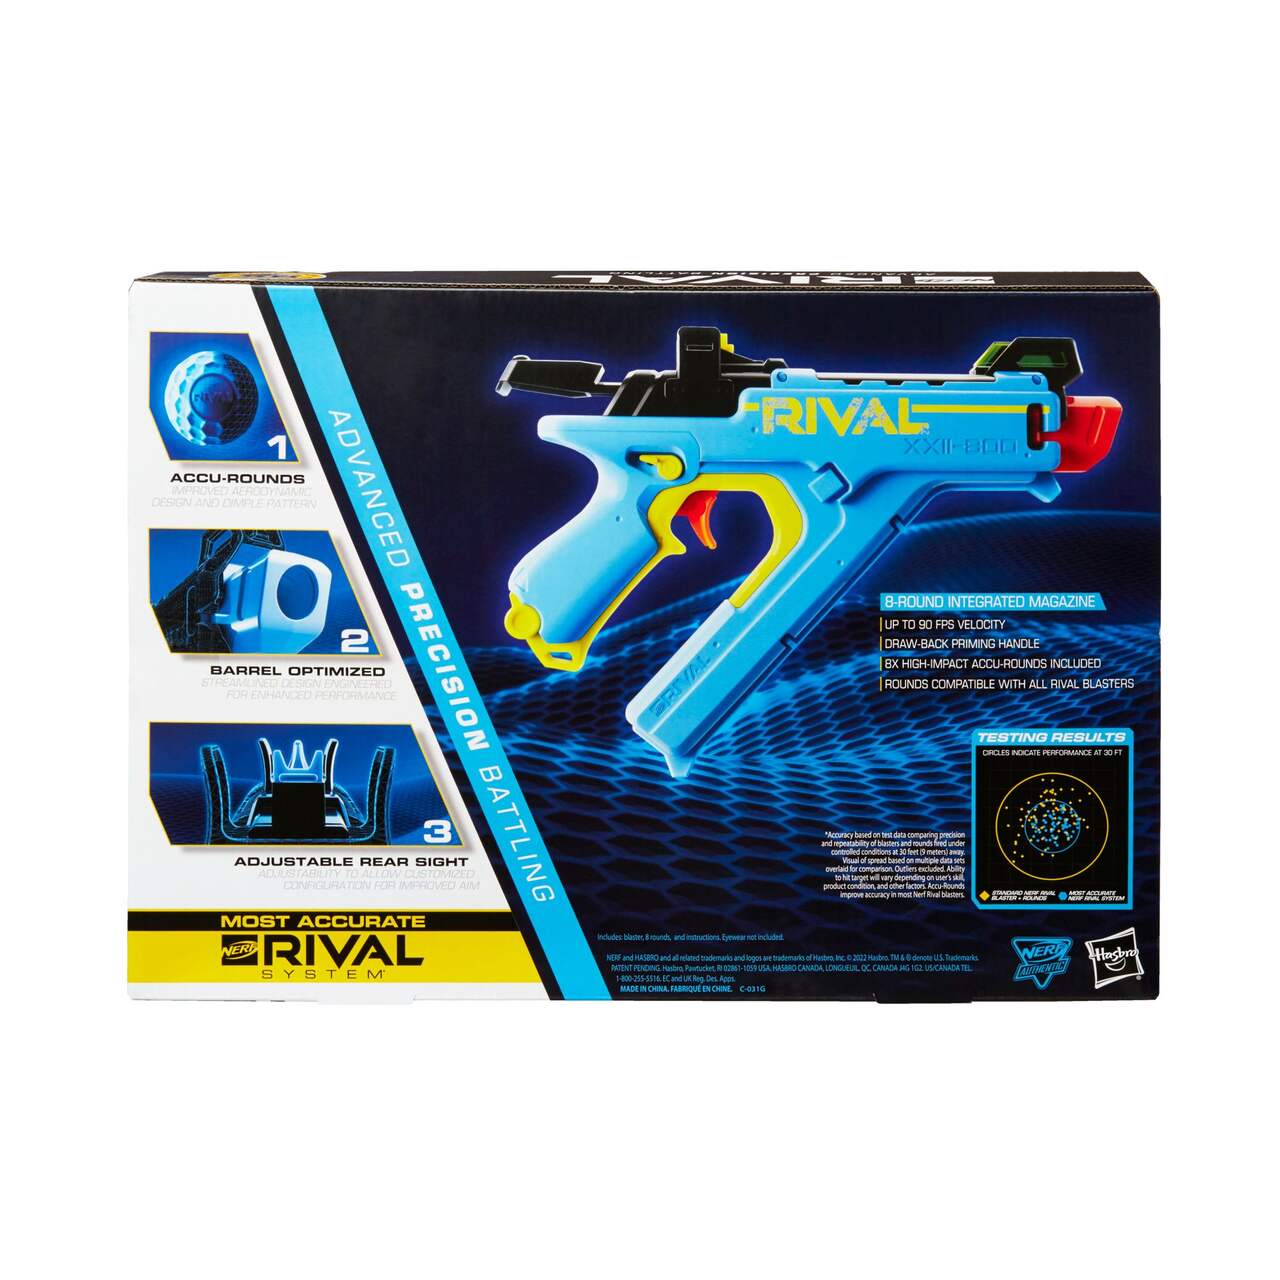 NERF Rival Vision XXII-800 Blaster, Adjustable Sight, 8 Nerf Rival Accu- Rounds, Age 7+